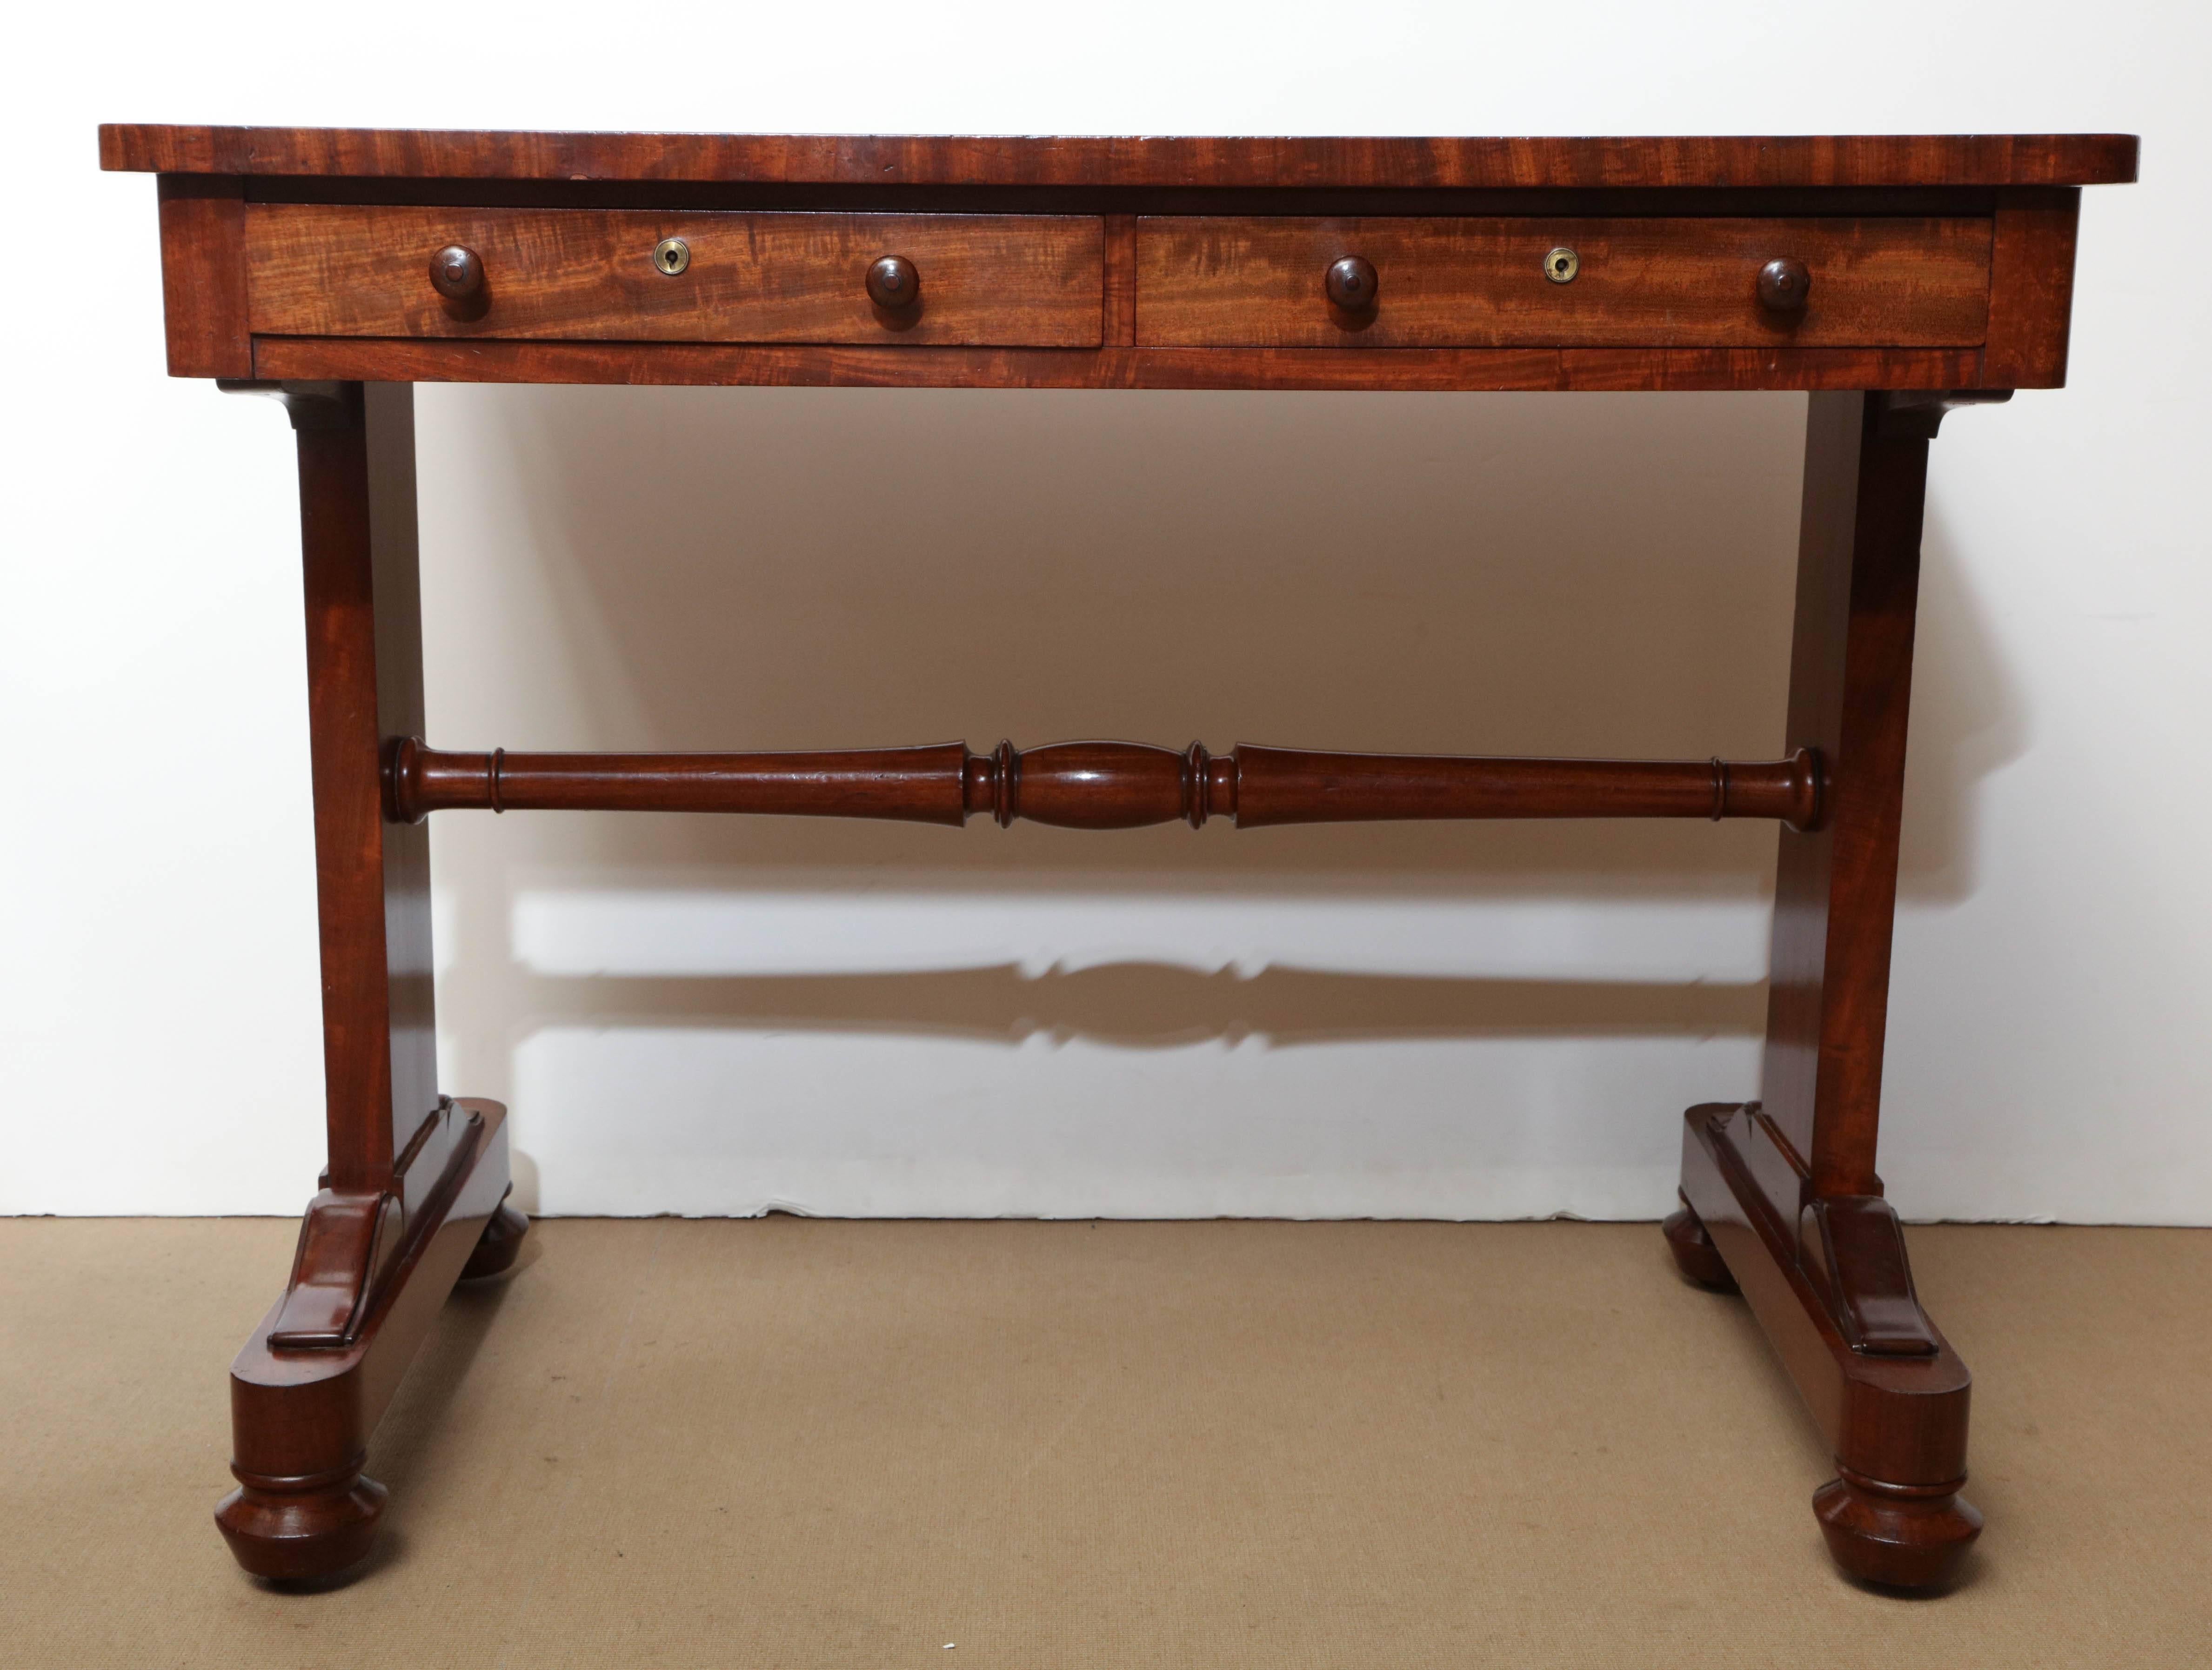 Early 19th century English, mahogany and leather top desk by Gillows & Co.